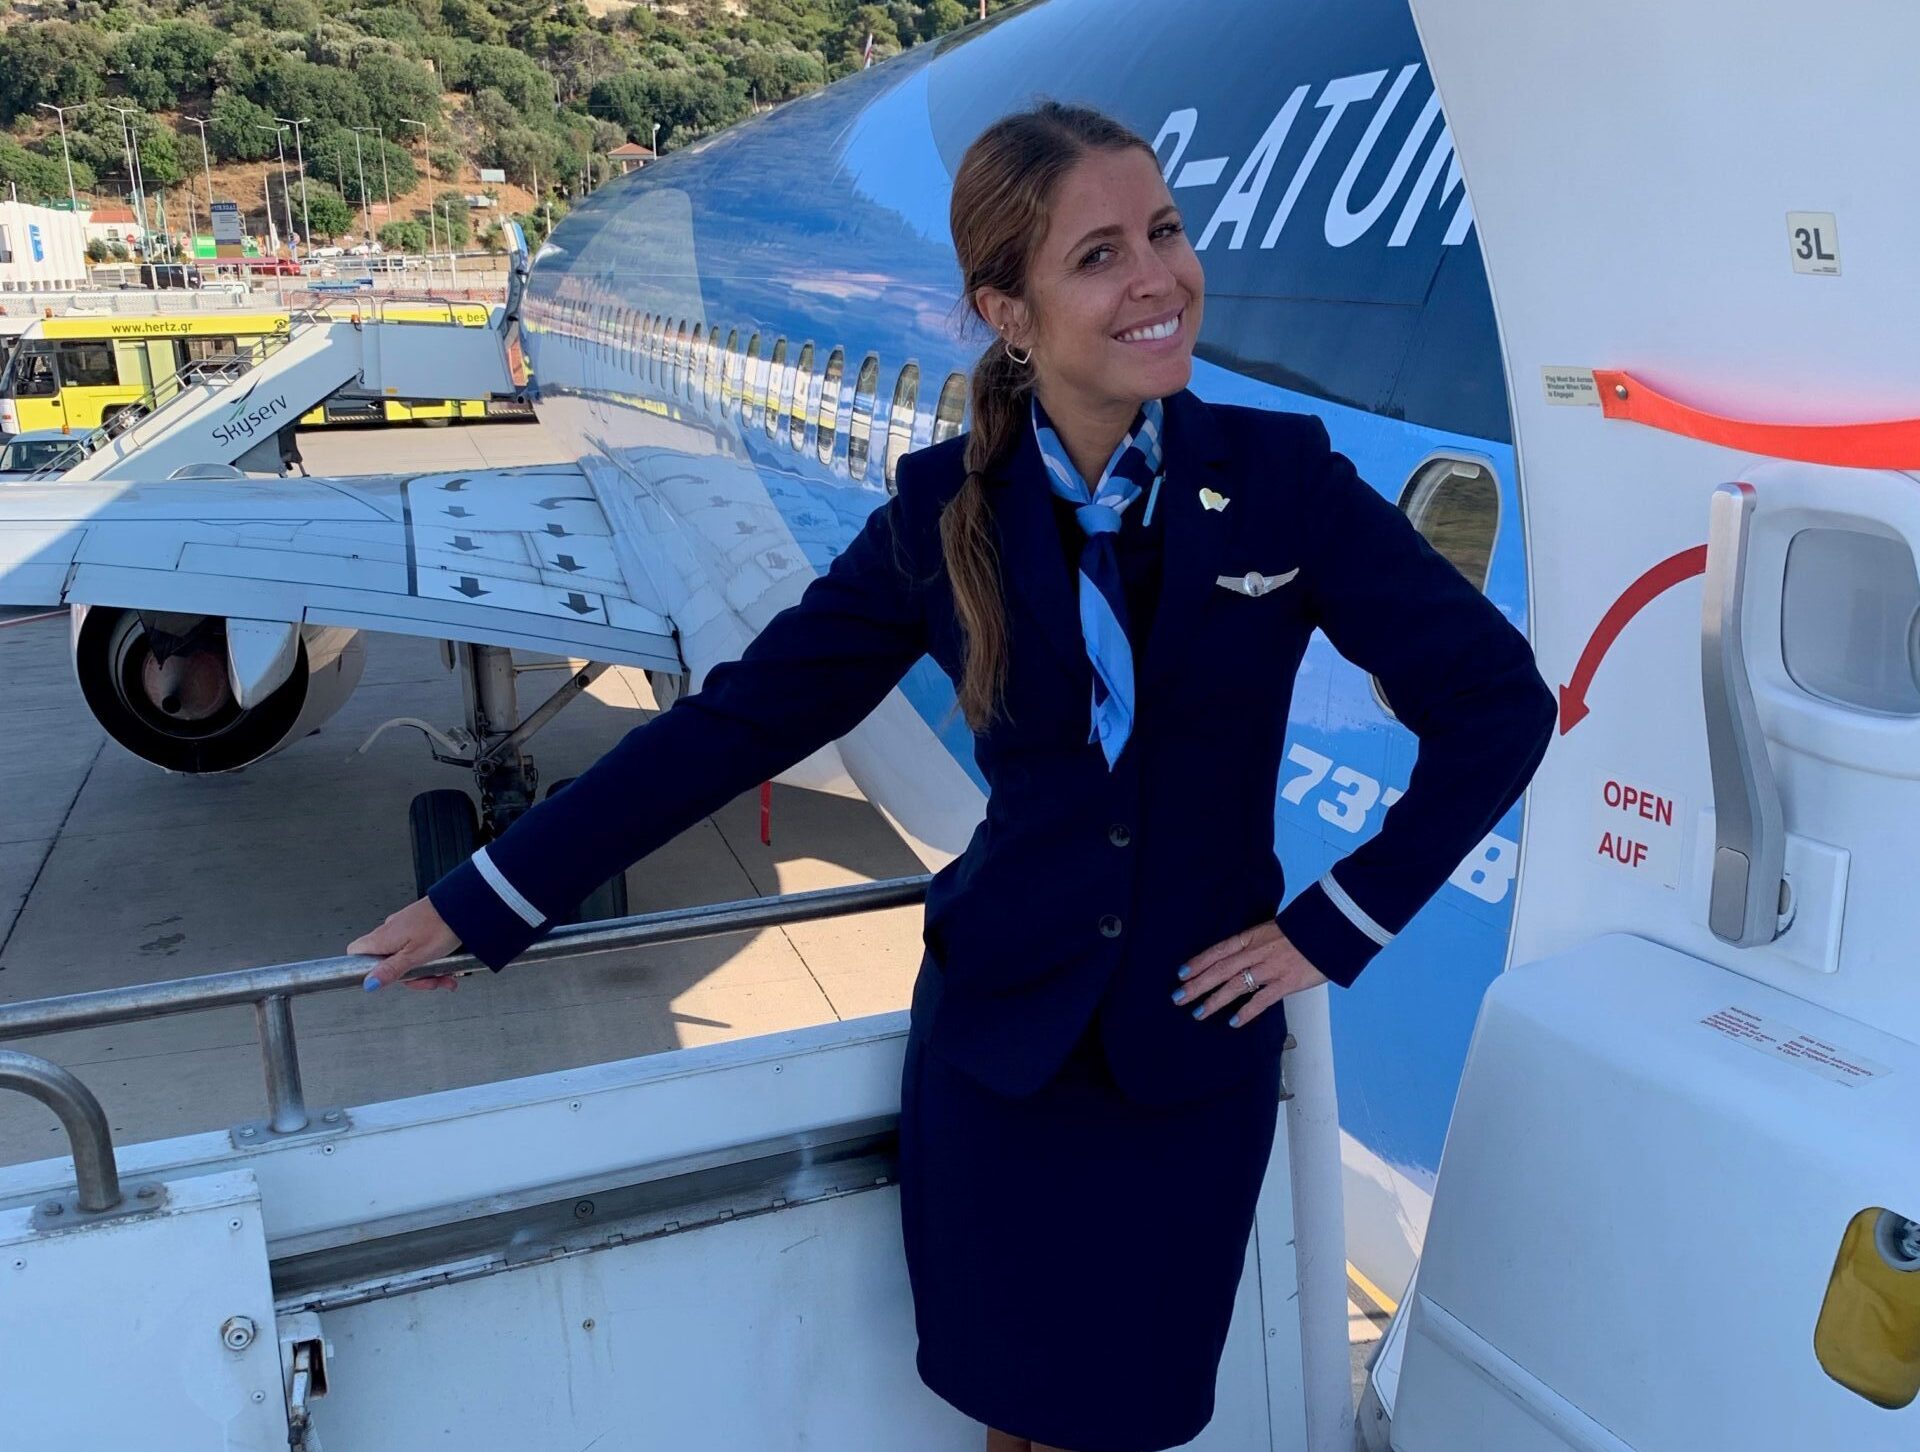 A cabin crew member standing on the steps outside an aircraft. You can see the mountains behind the plane in the background. The cabin crew member is wearing company uniform and smiling.